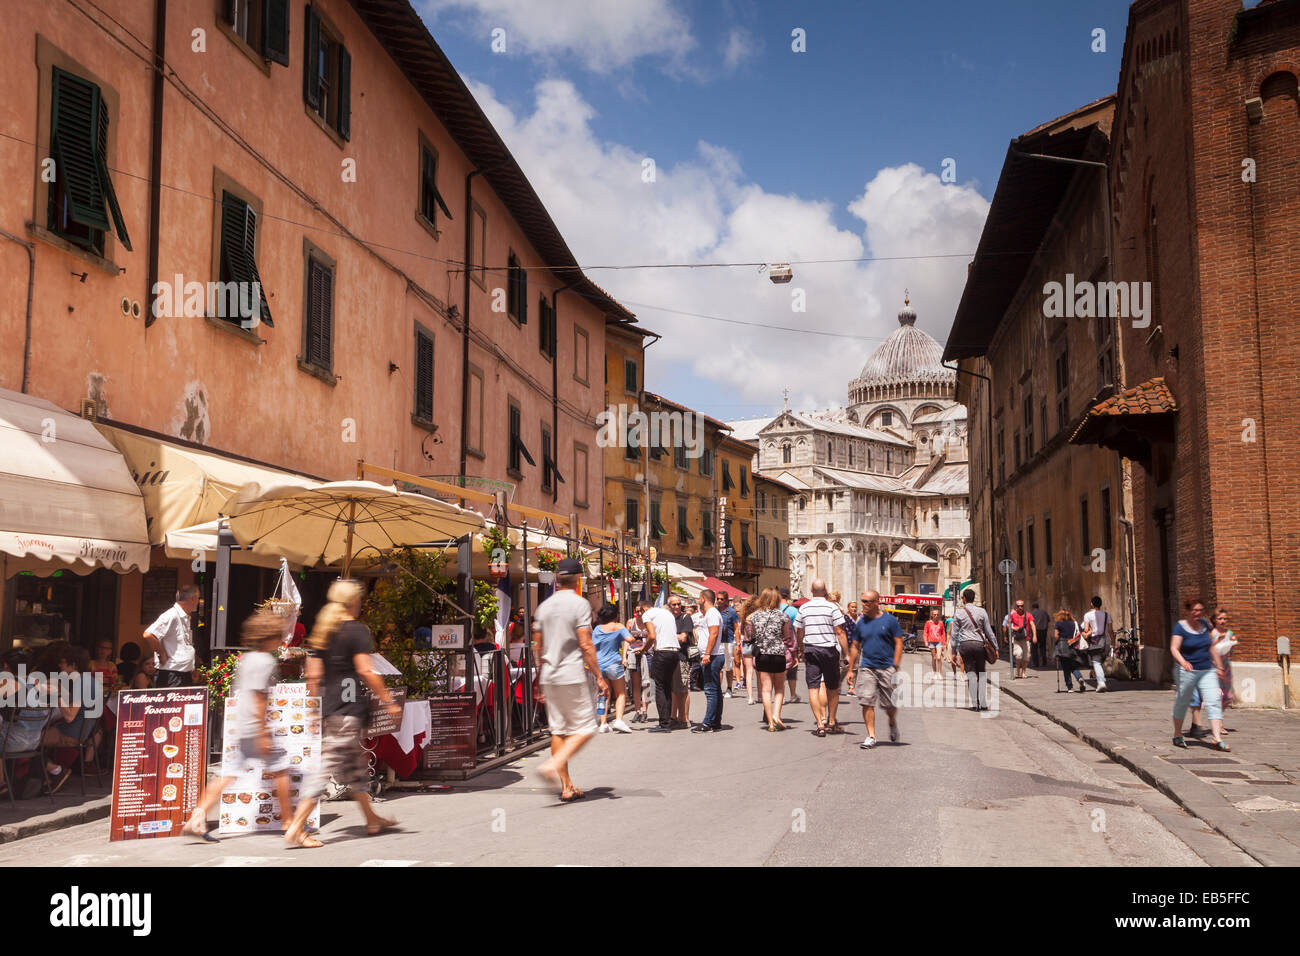 Via Santa Maria in Pisa, Italy. The Duomo di Pisa is seen at the end of the street. Stock Photo